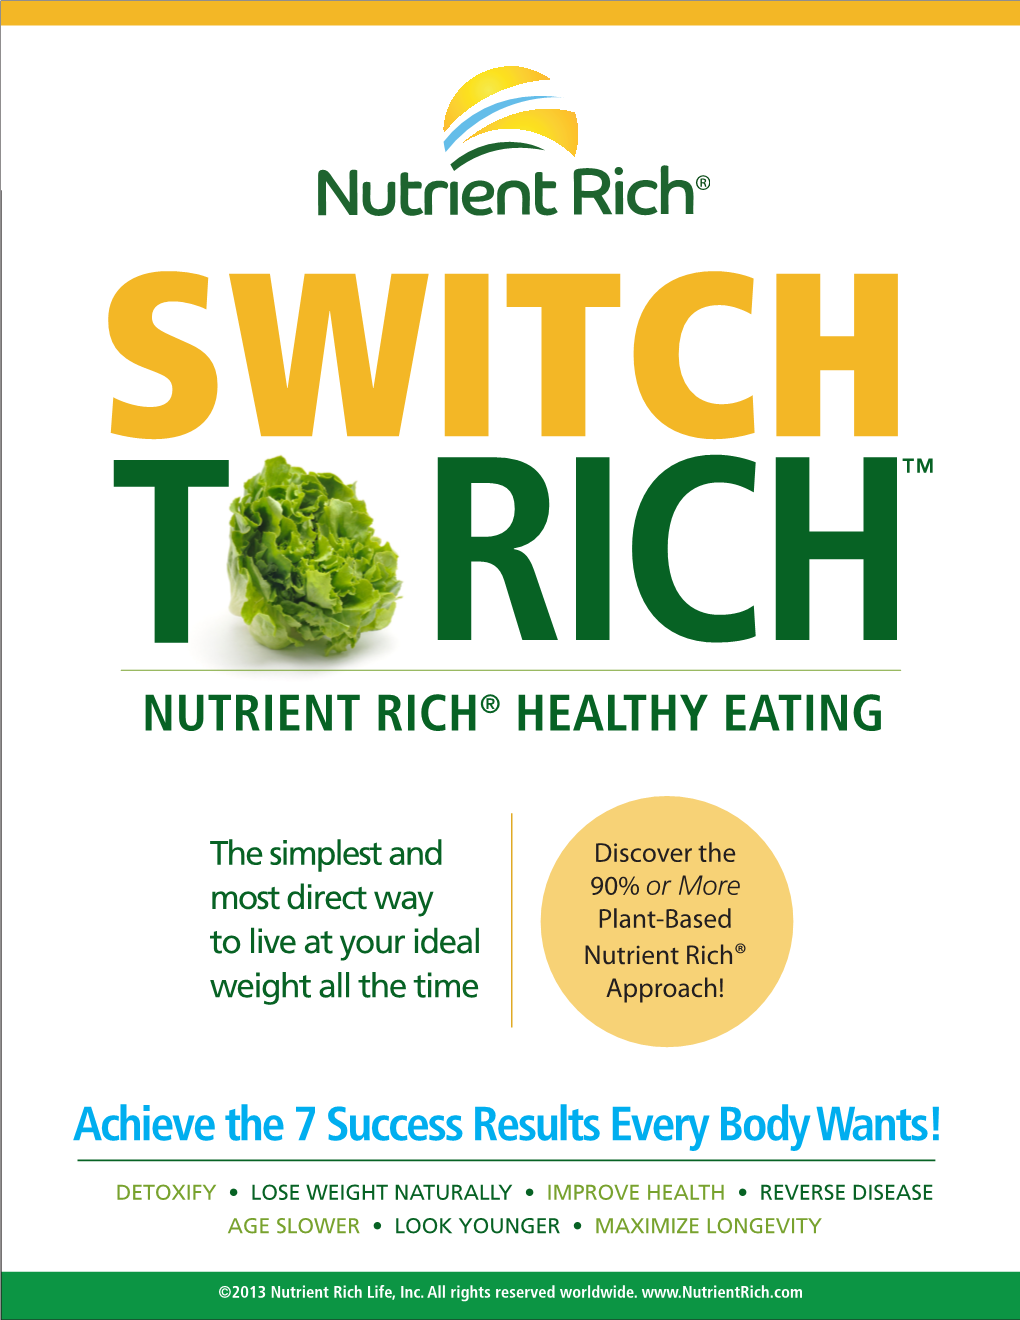 Nutrient Rich® Healthy Eating